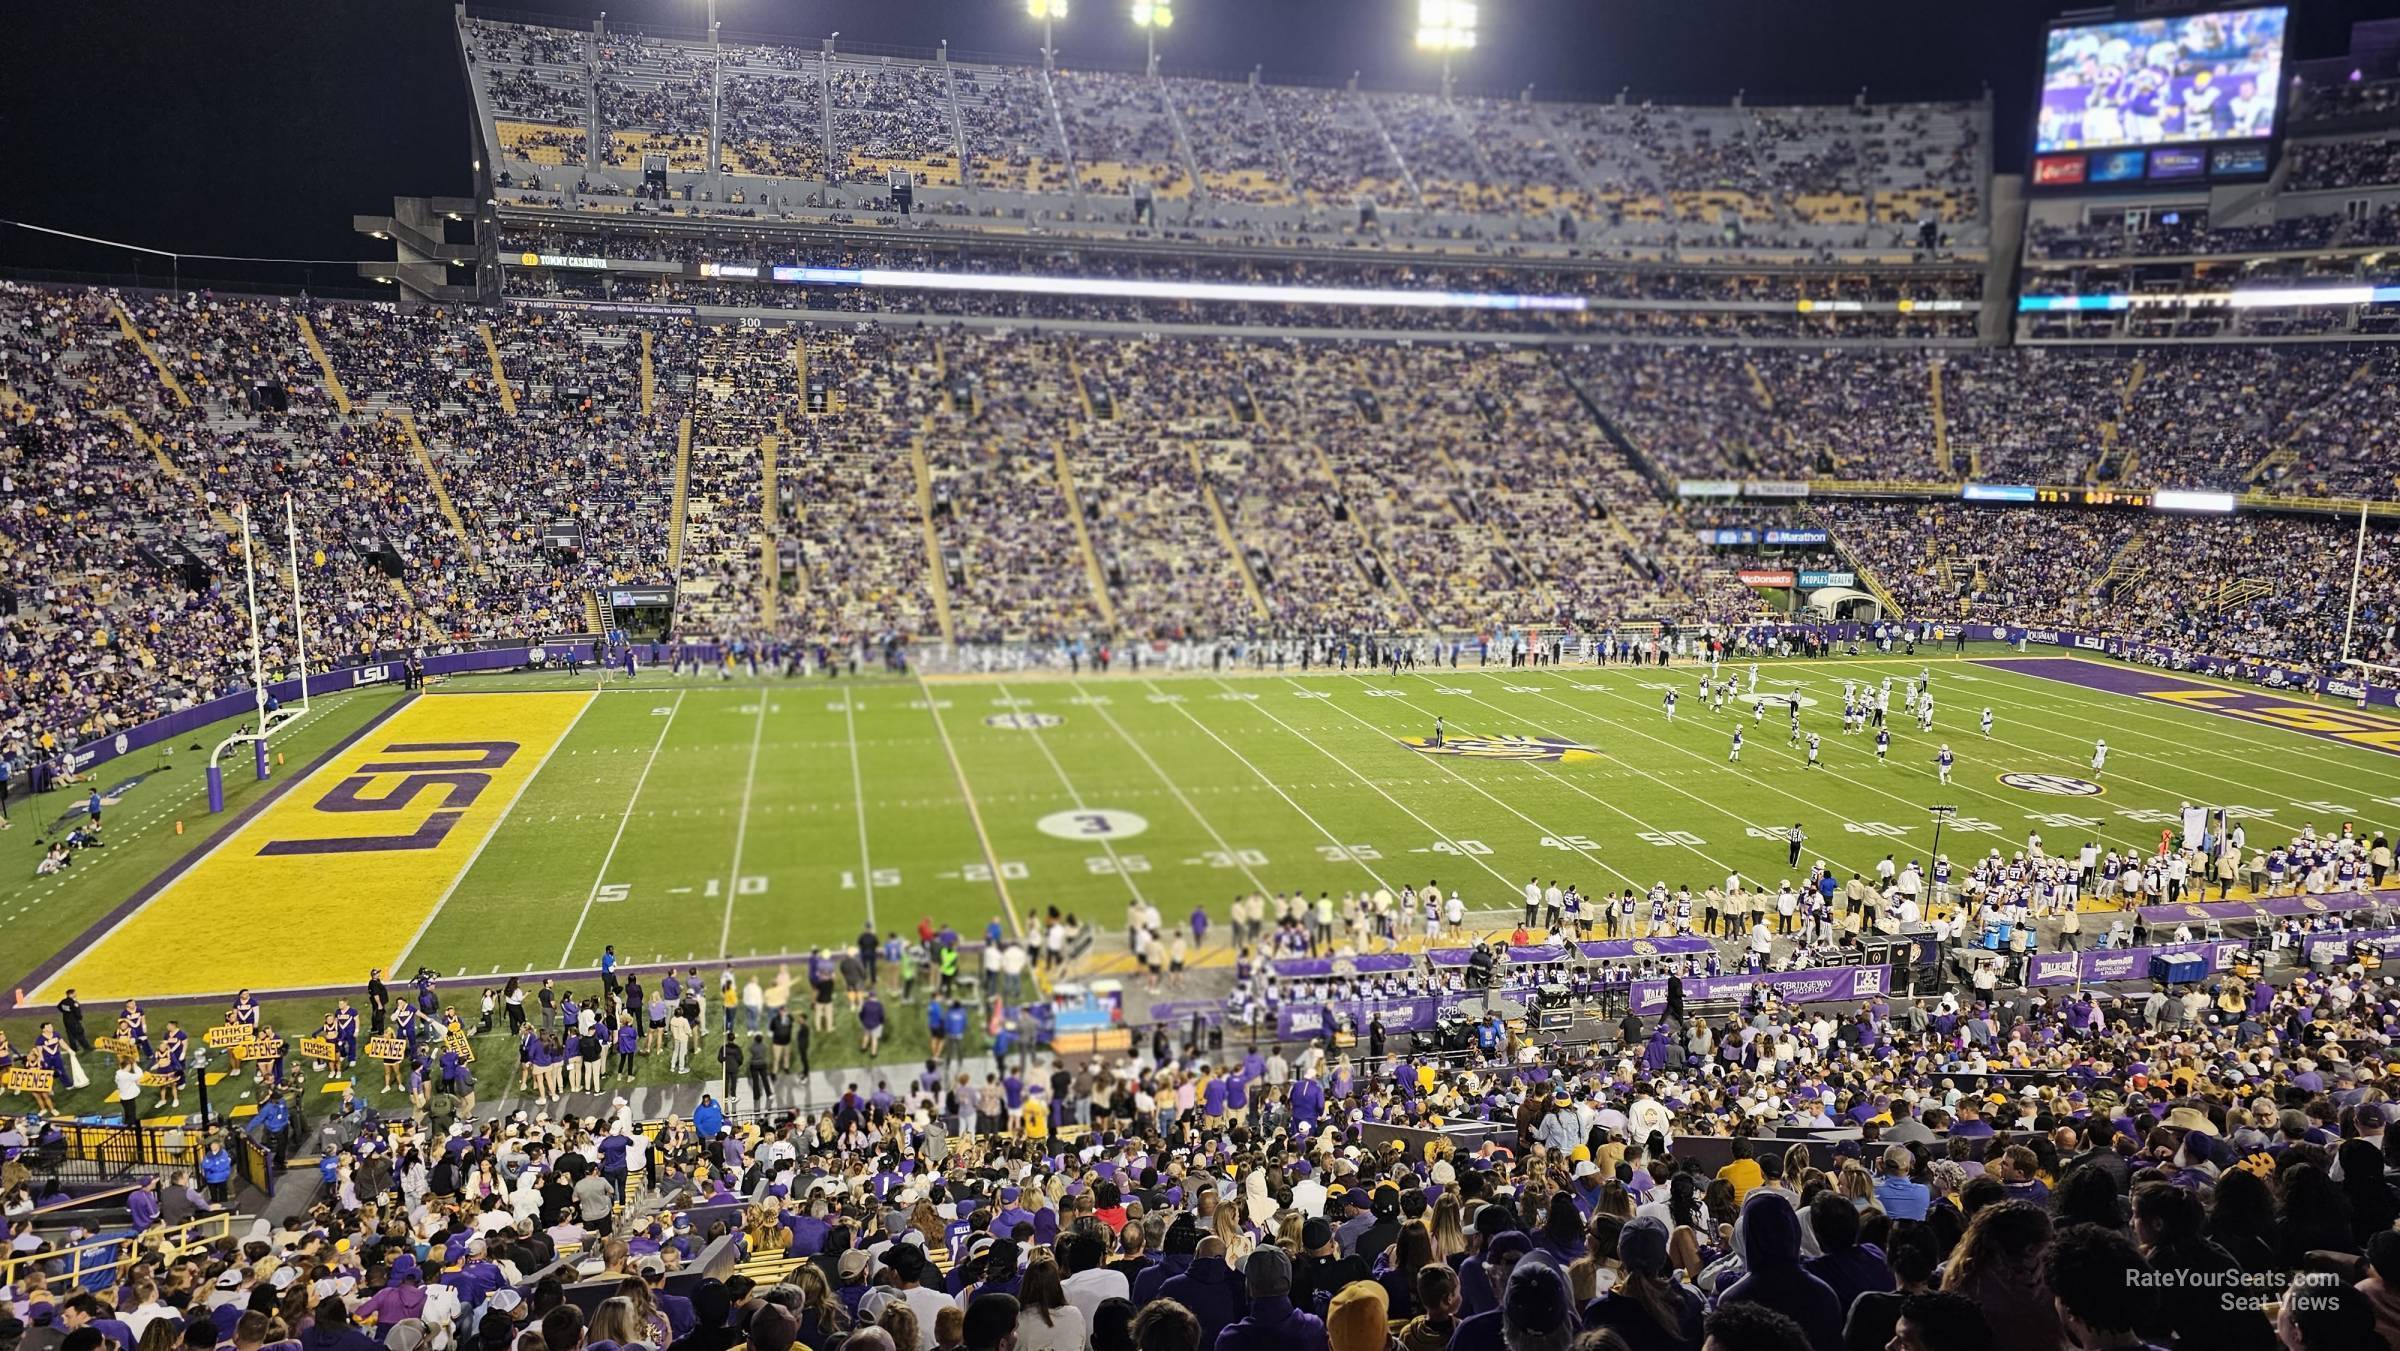 section 106, row 48 seat view  - tiger stadium